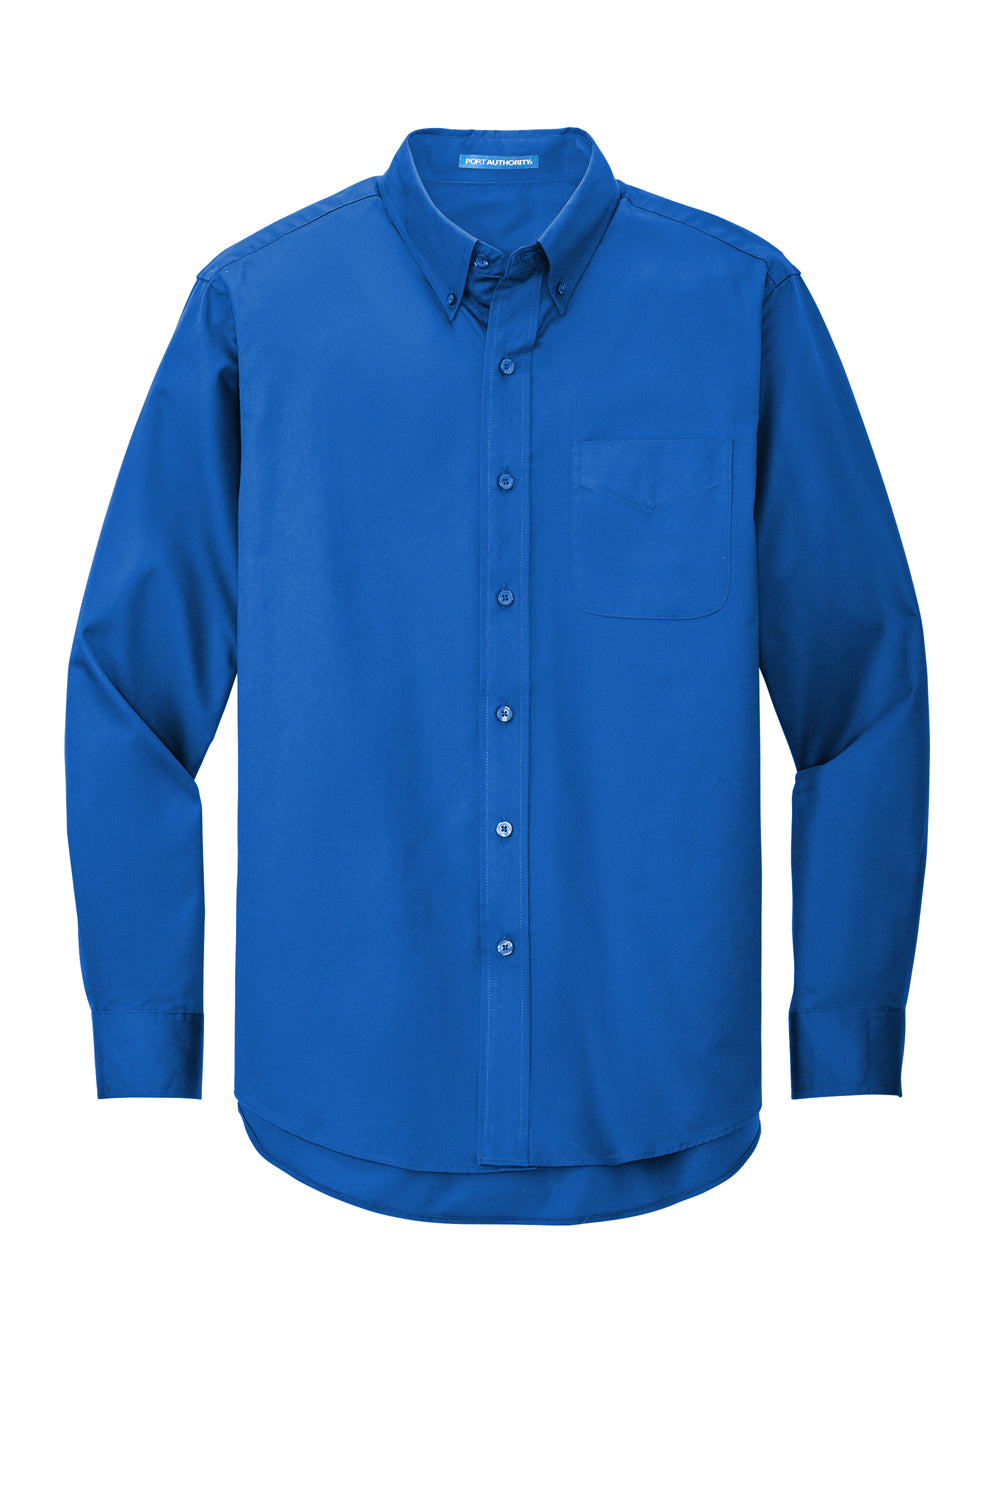 Port Authority S608/TLS608/S608ES Mens Easy Care Wrinkle Resistant Long Sleeve Button Down Shirt w/ Pocket Strong Blue Flat Front